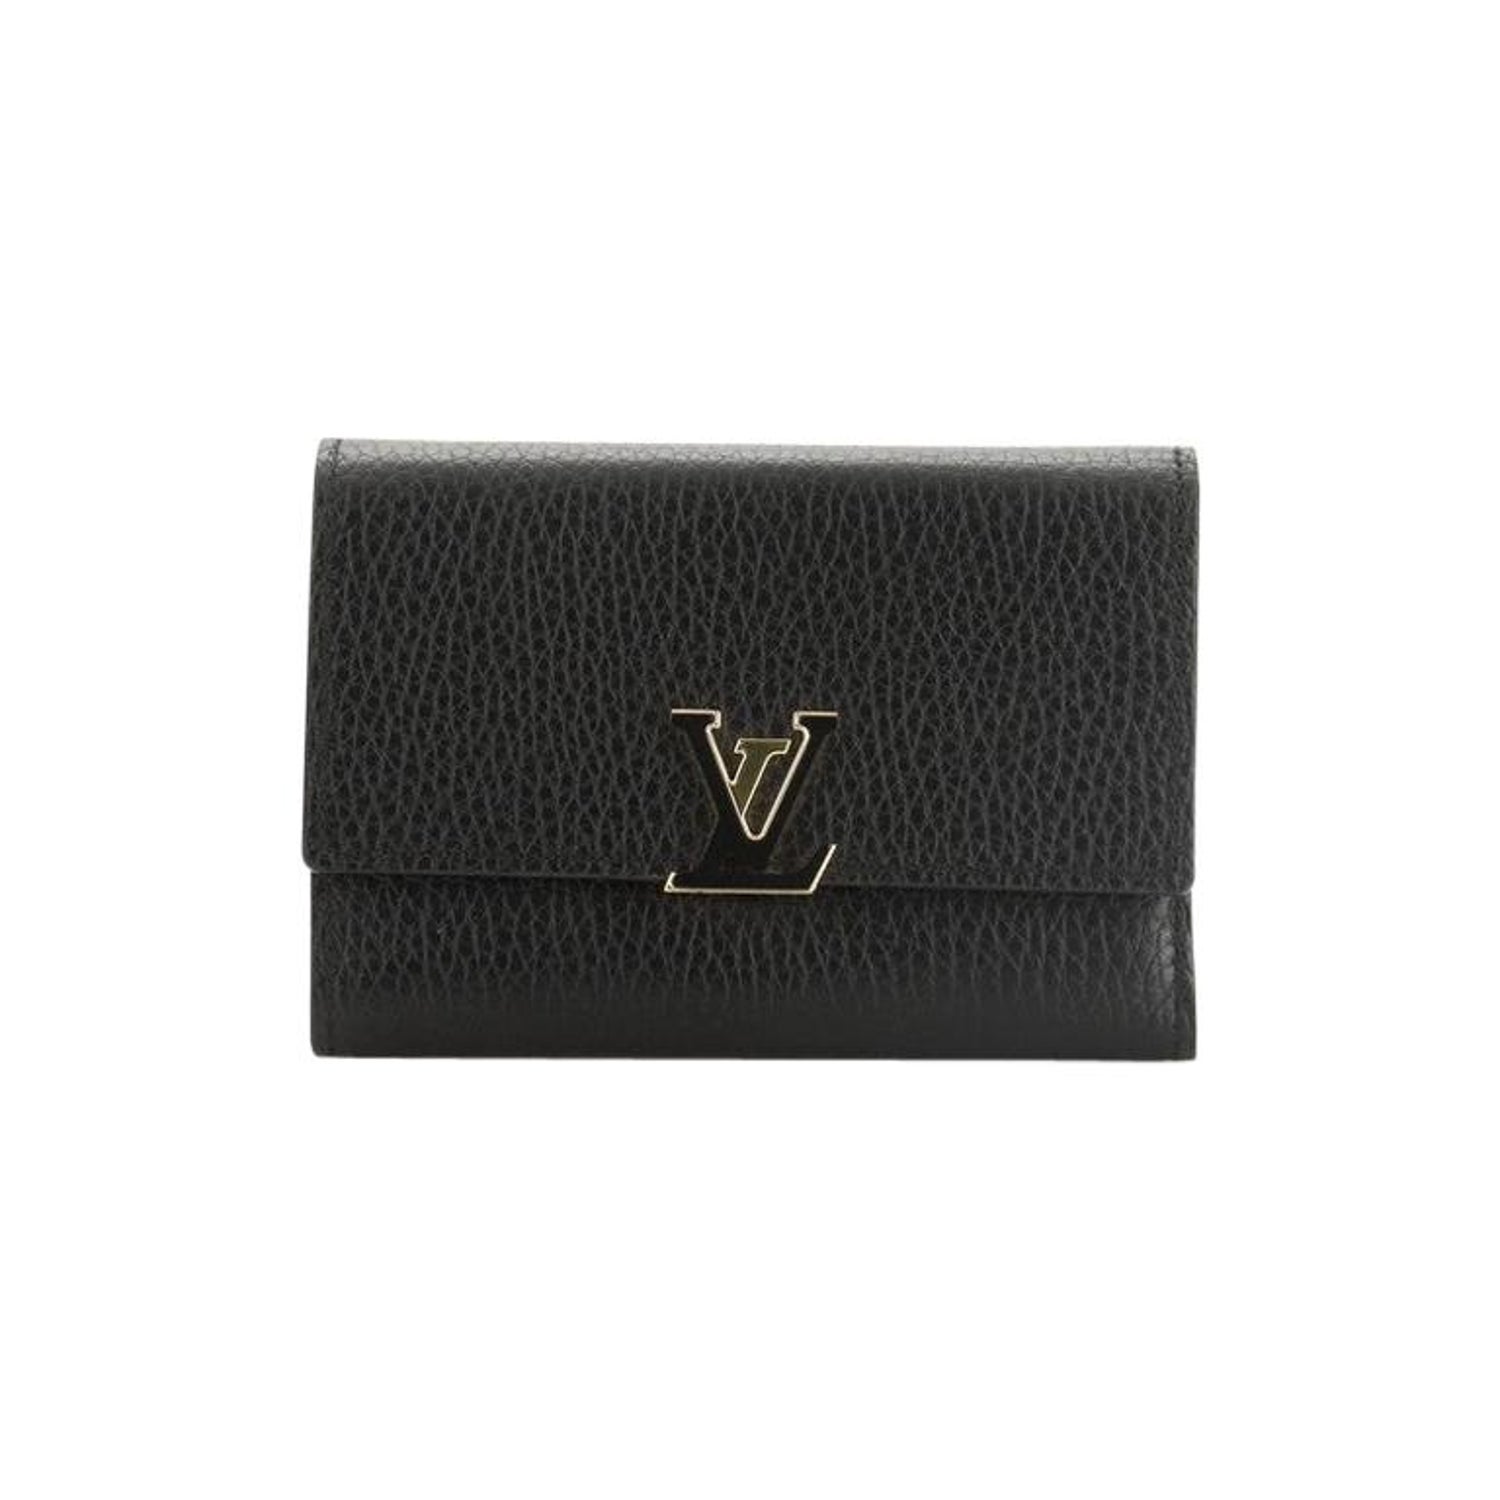 Louis Vuitton Taurillon Leather Capucines Compact Trifold Wallet